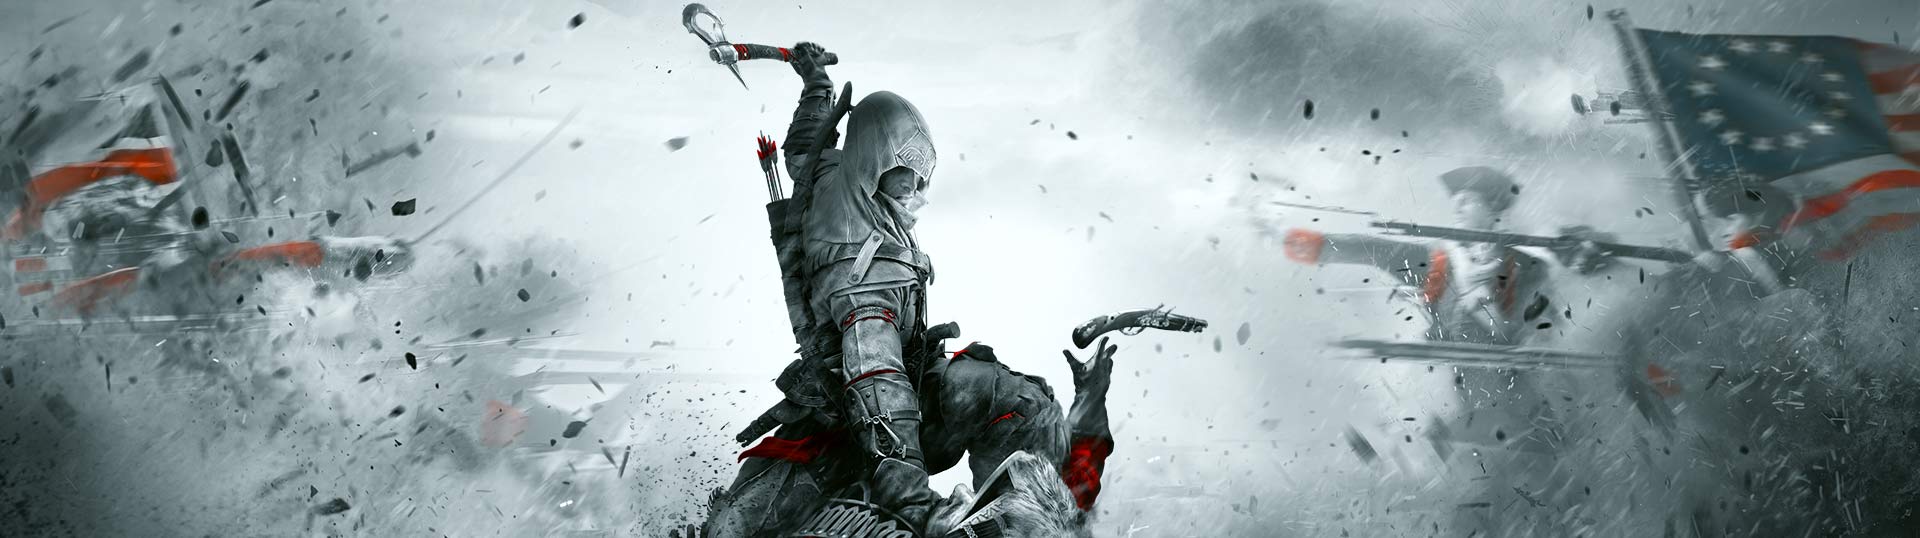 Assassin's Creed III Remastered Switch Review: Not The Revolution We Wanted